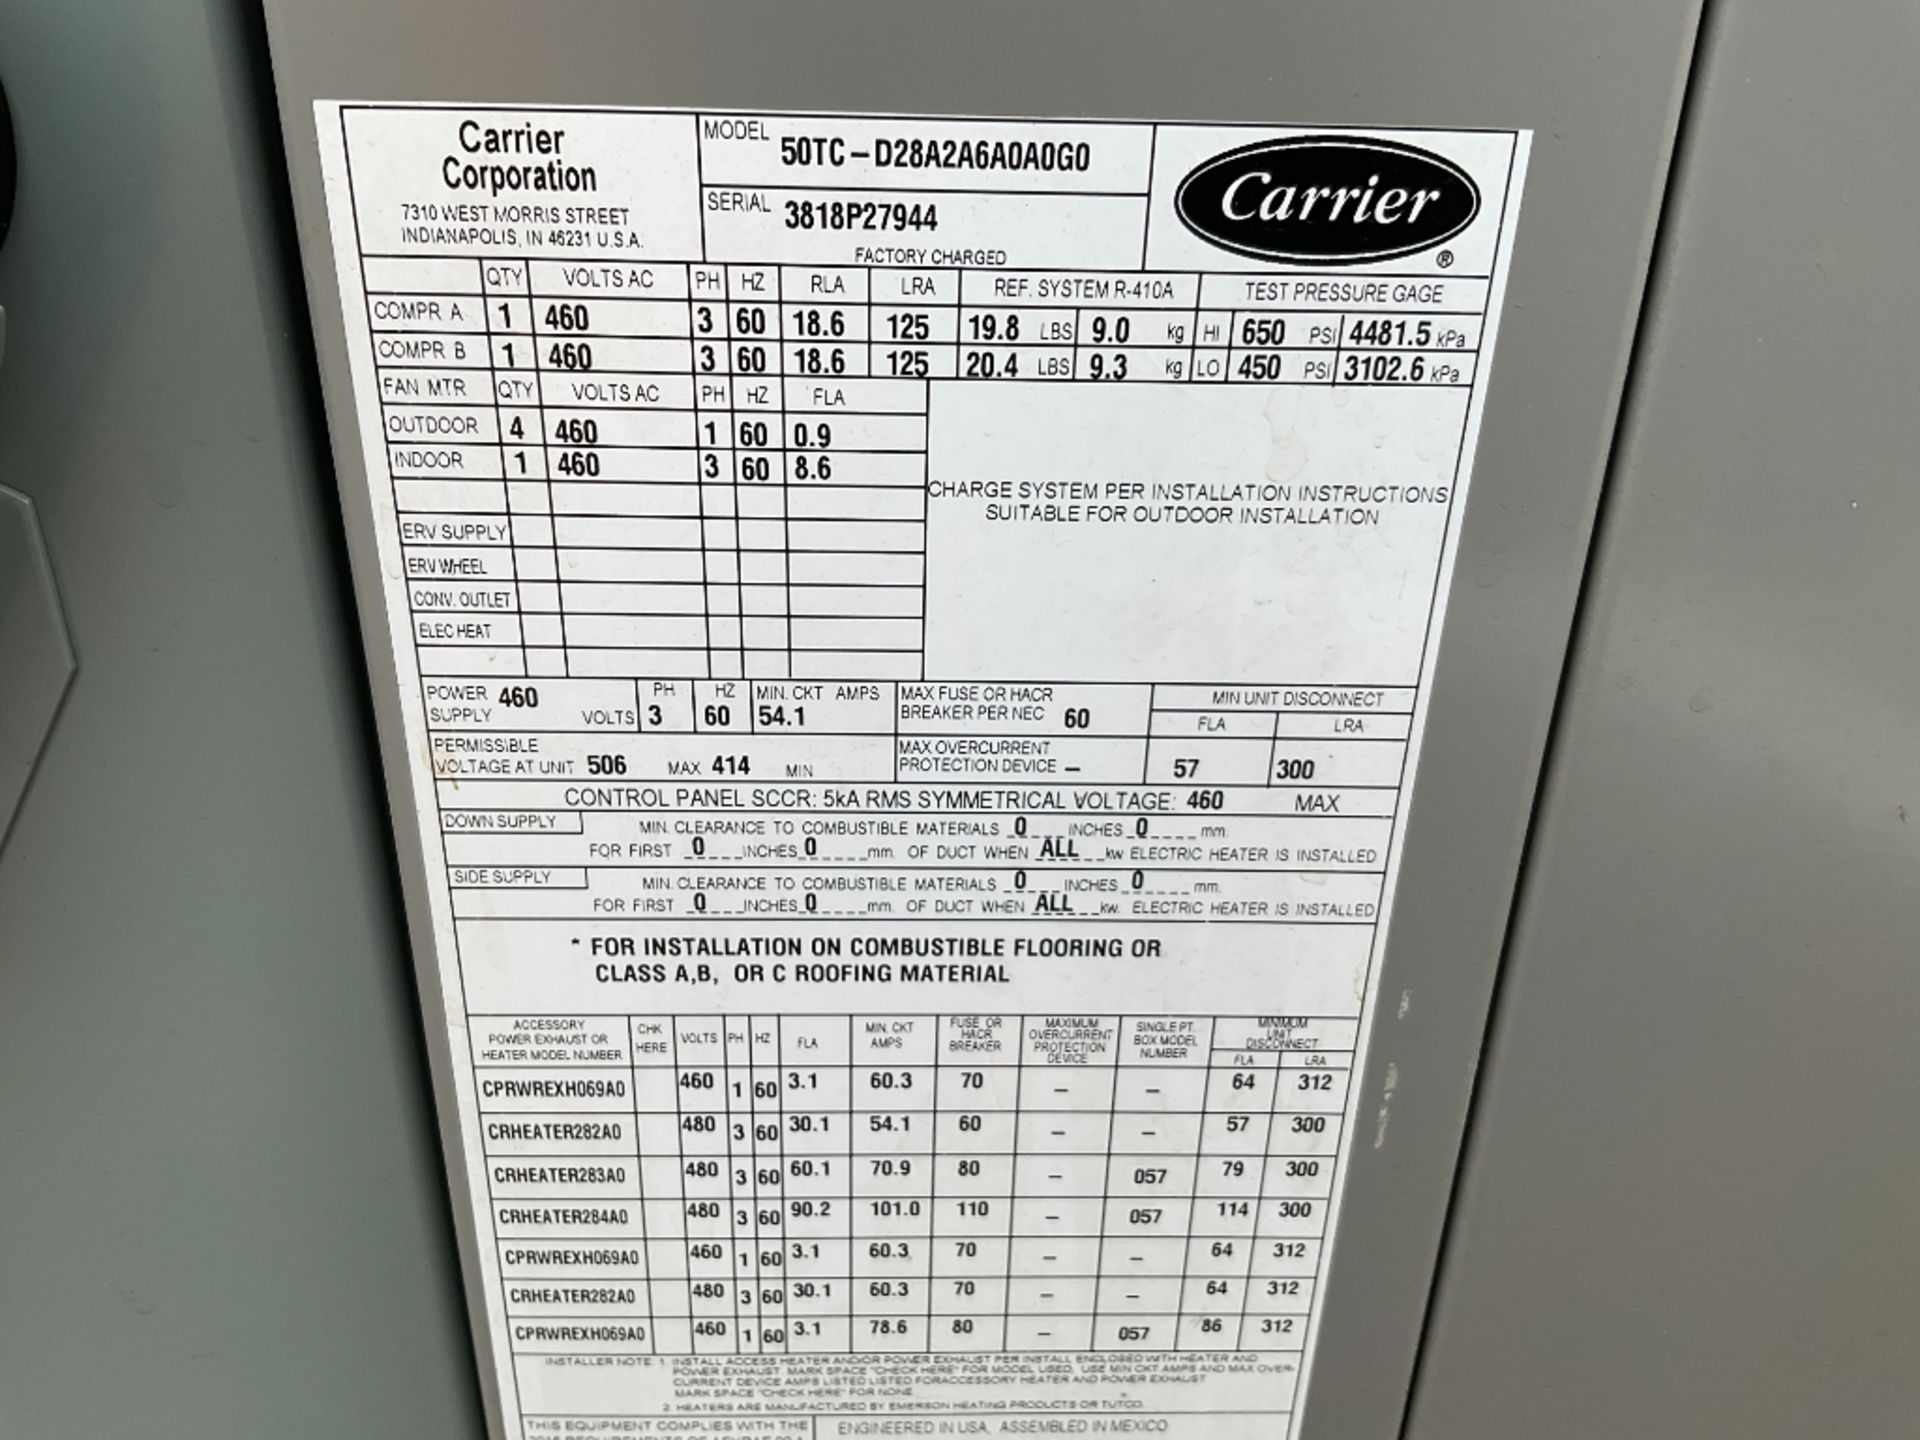 Carrier Model 50TC- D28A2A6A0A0G0 Rooftop Cooling Unit - Image 2 of 17